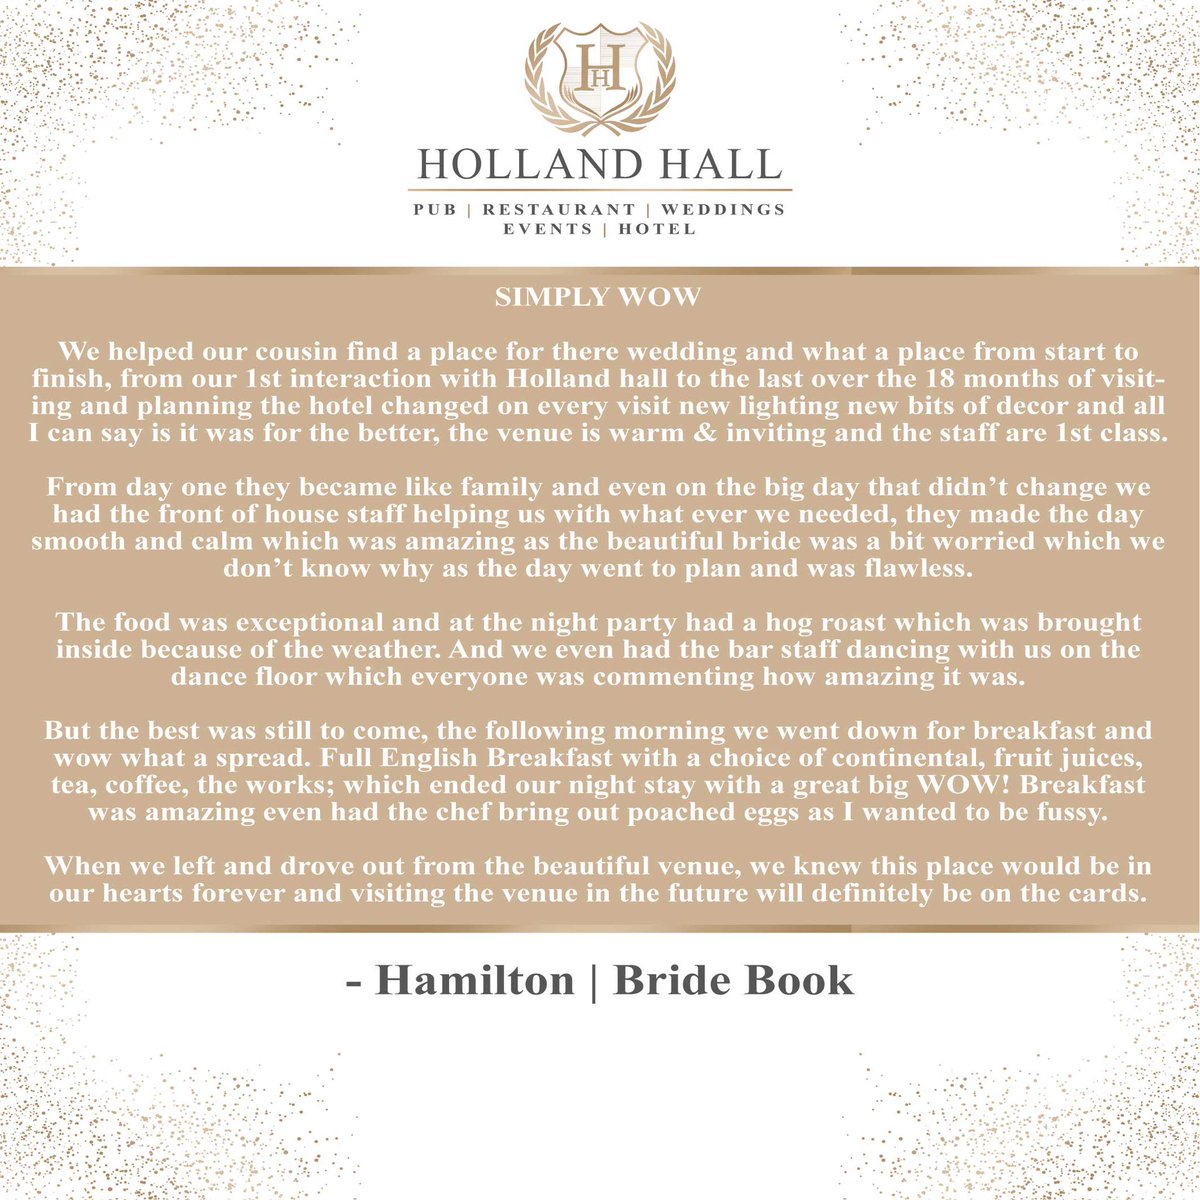 ✨SIMPLY WOW!✨

Thank you for the amazing review! We are overwhelmed to hear that our gorgeous hidden gem, stole your heart! We hope to see you again soon. Holland Hall Team. ❤️💎🥰

#ThankYou #GreatReview #GreatFood #GreatService #GreatVenue #wearehollandhall